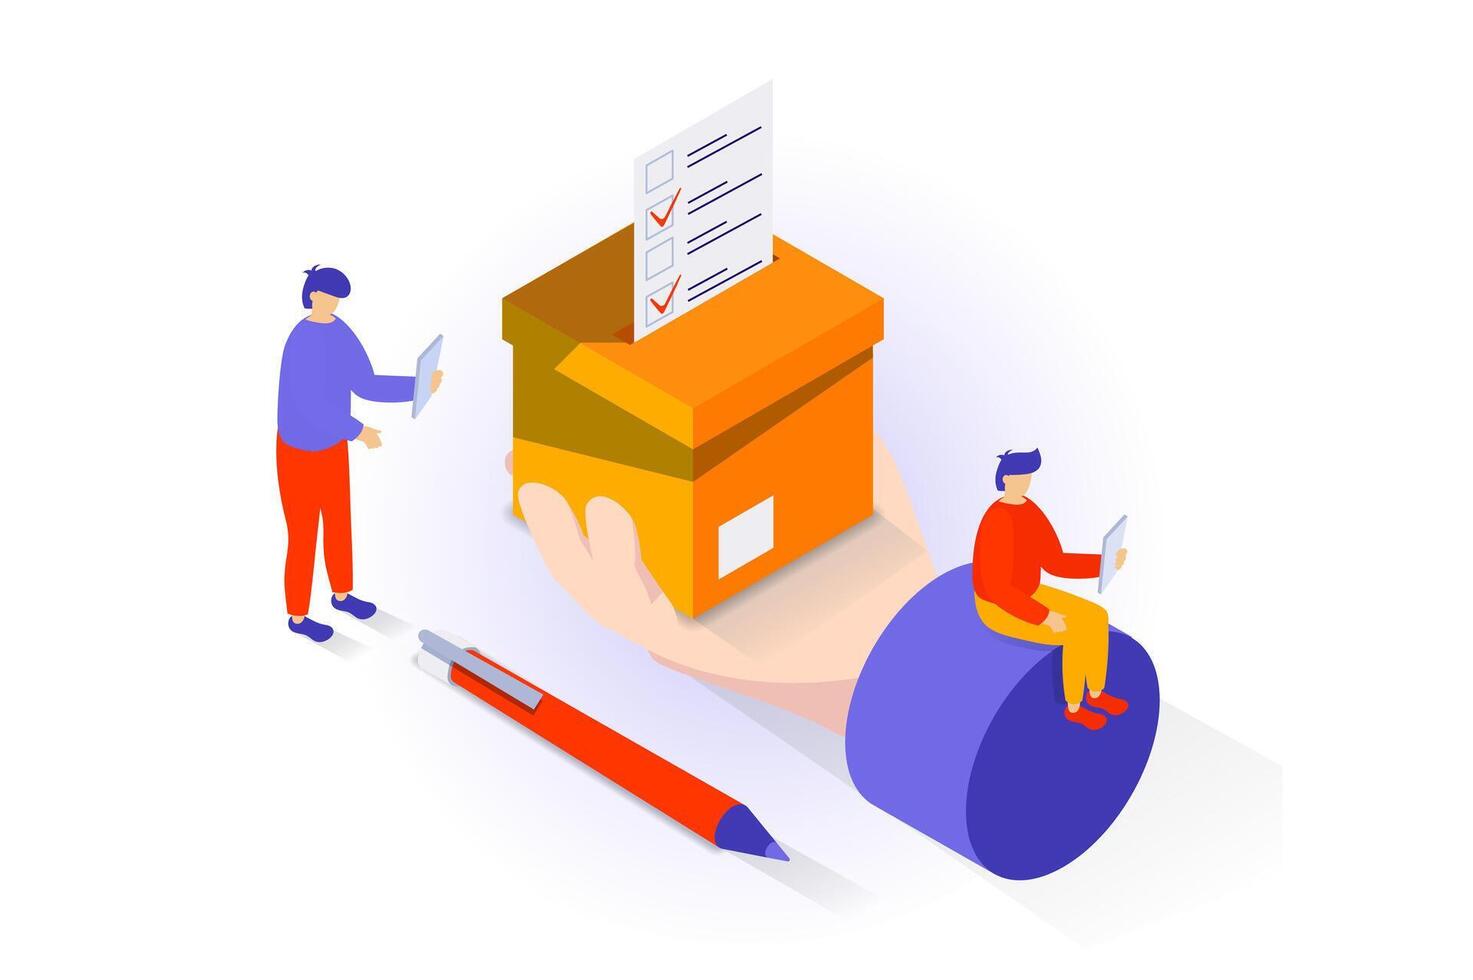 Election and voting concept in 3d isometric design. People choosing their political candidate and vote in elections, putting ballot in box. Vector illustration with isometry scene for web graphic